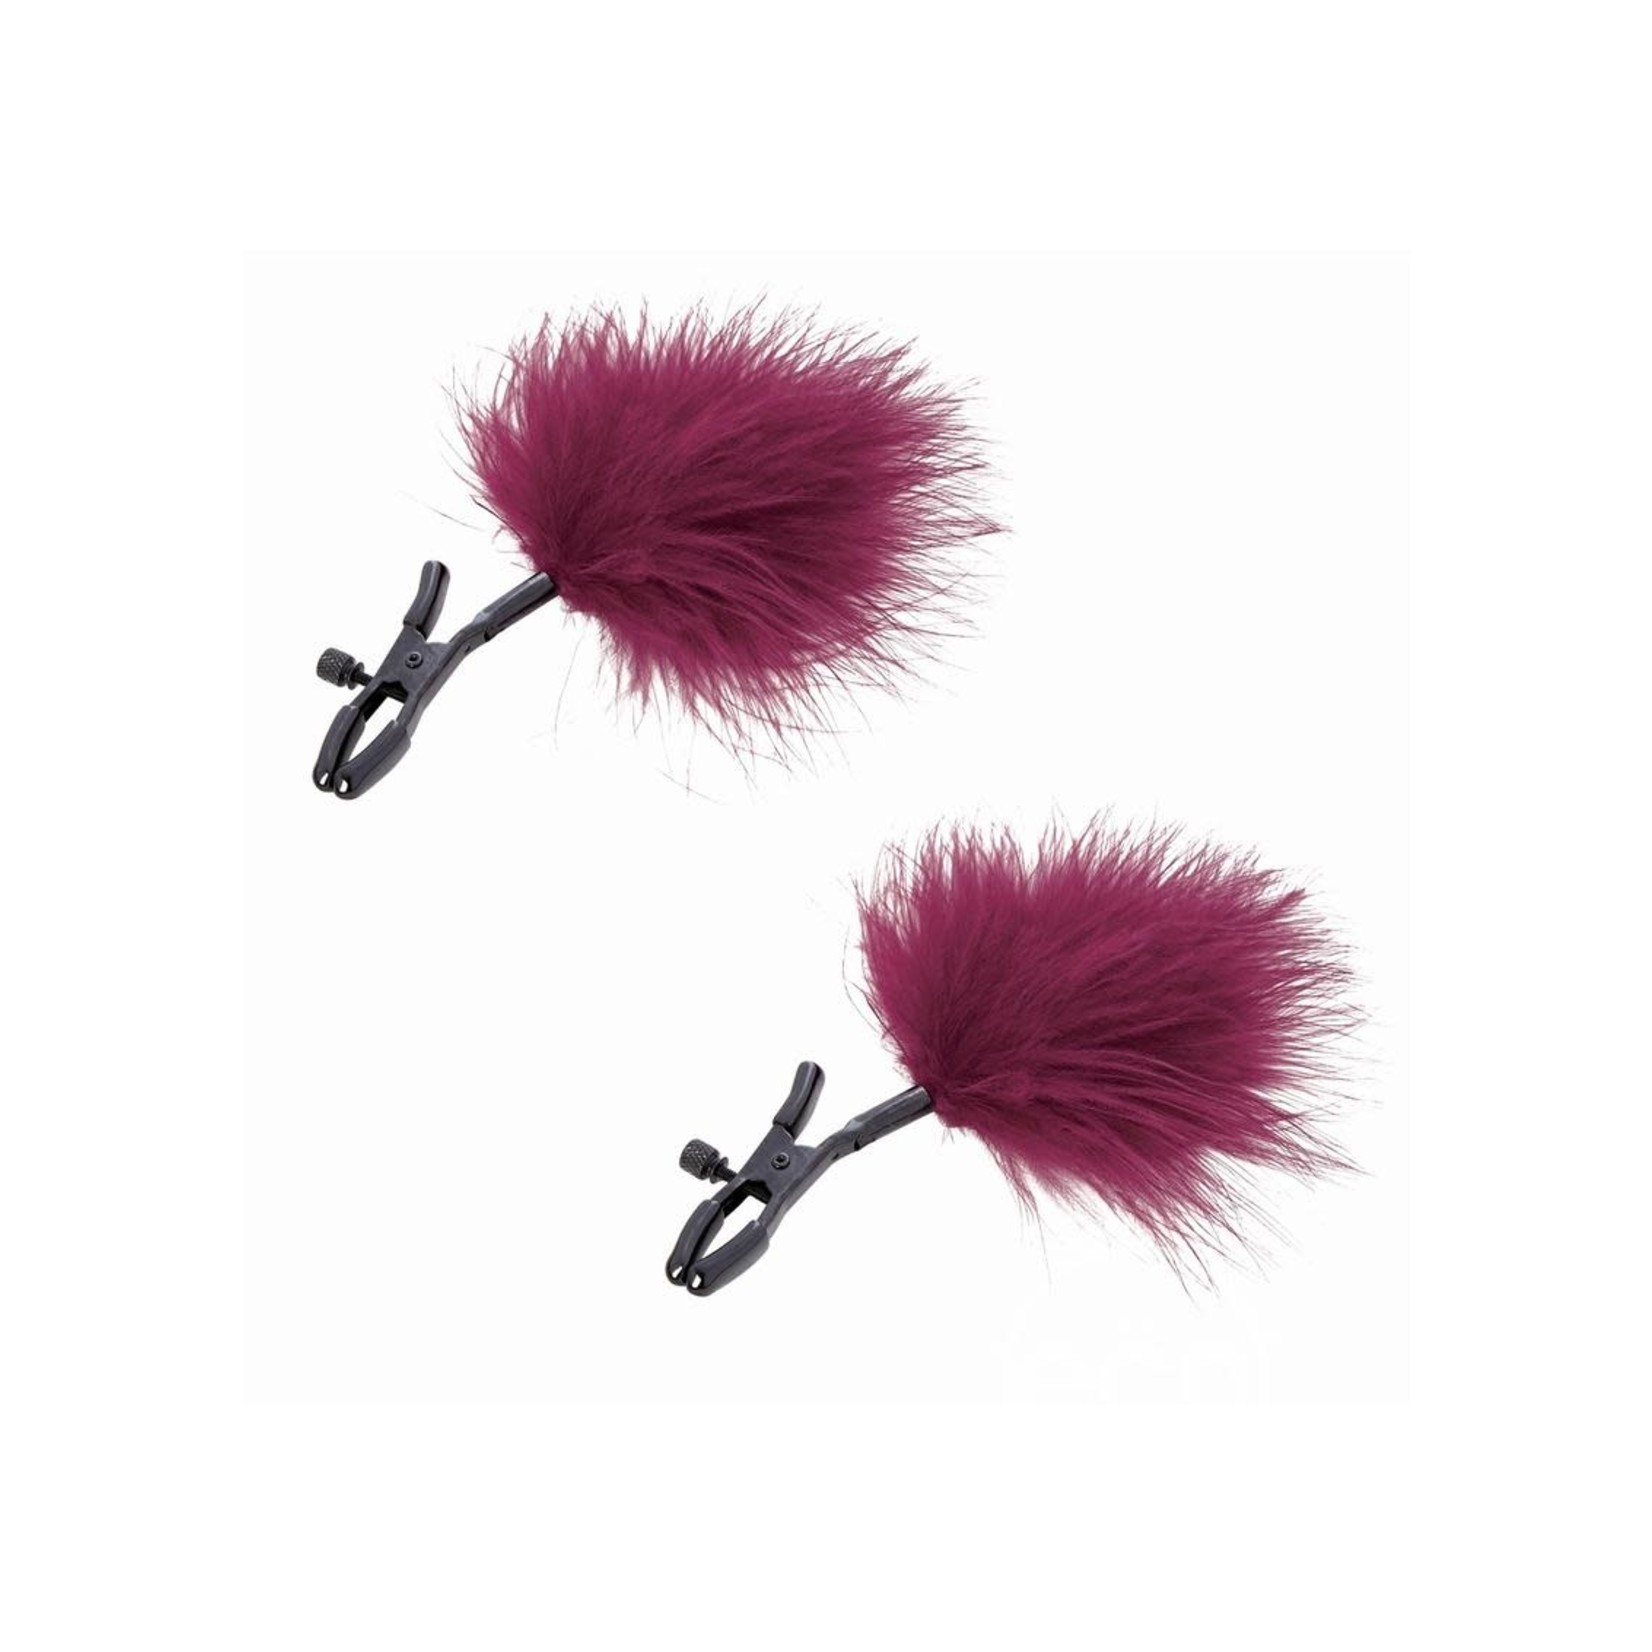 Sex & Mischief Enchanted Feather Nipple Clamps - Red/Black